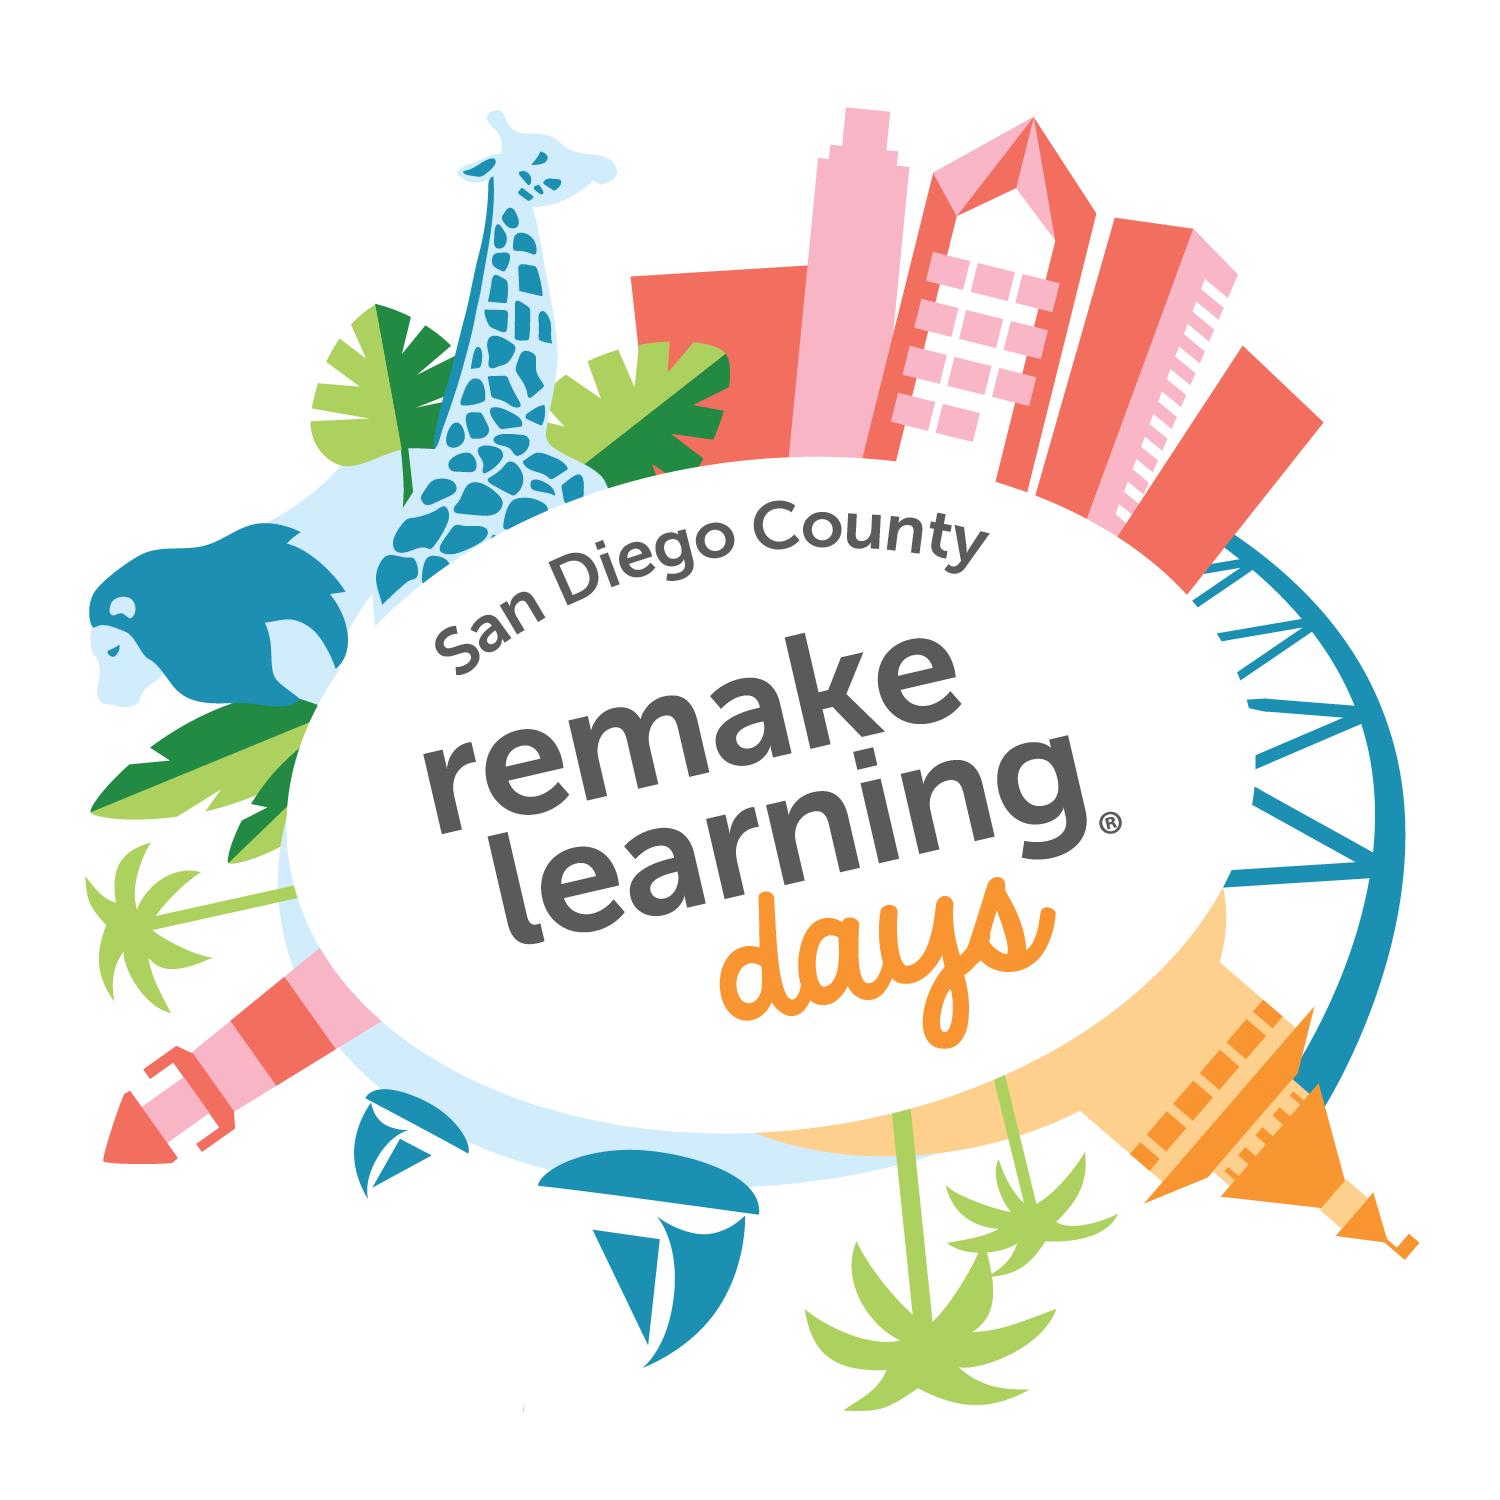 Remake Learning Days to showcase the future of learning with HundrED